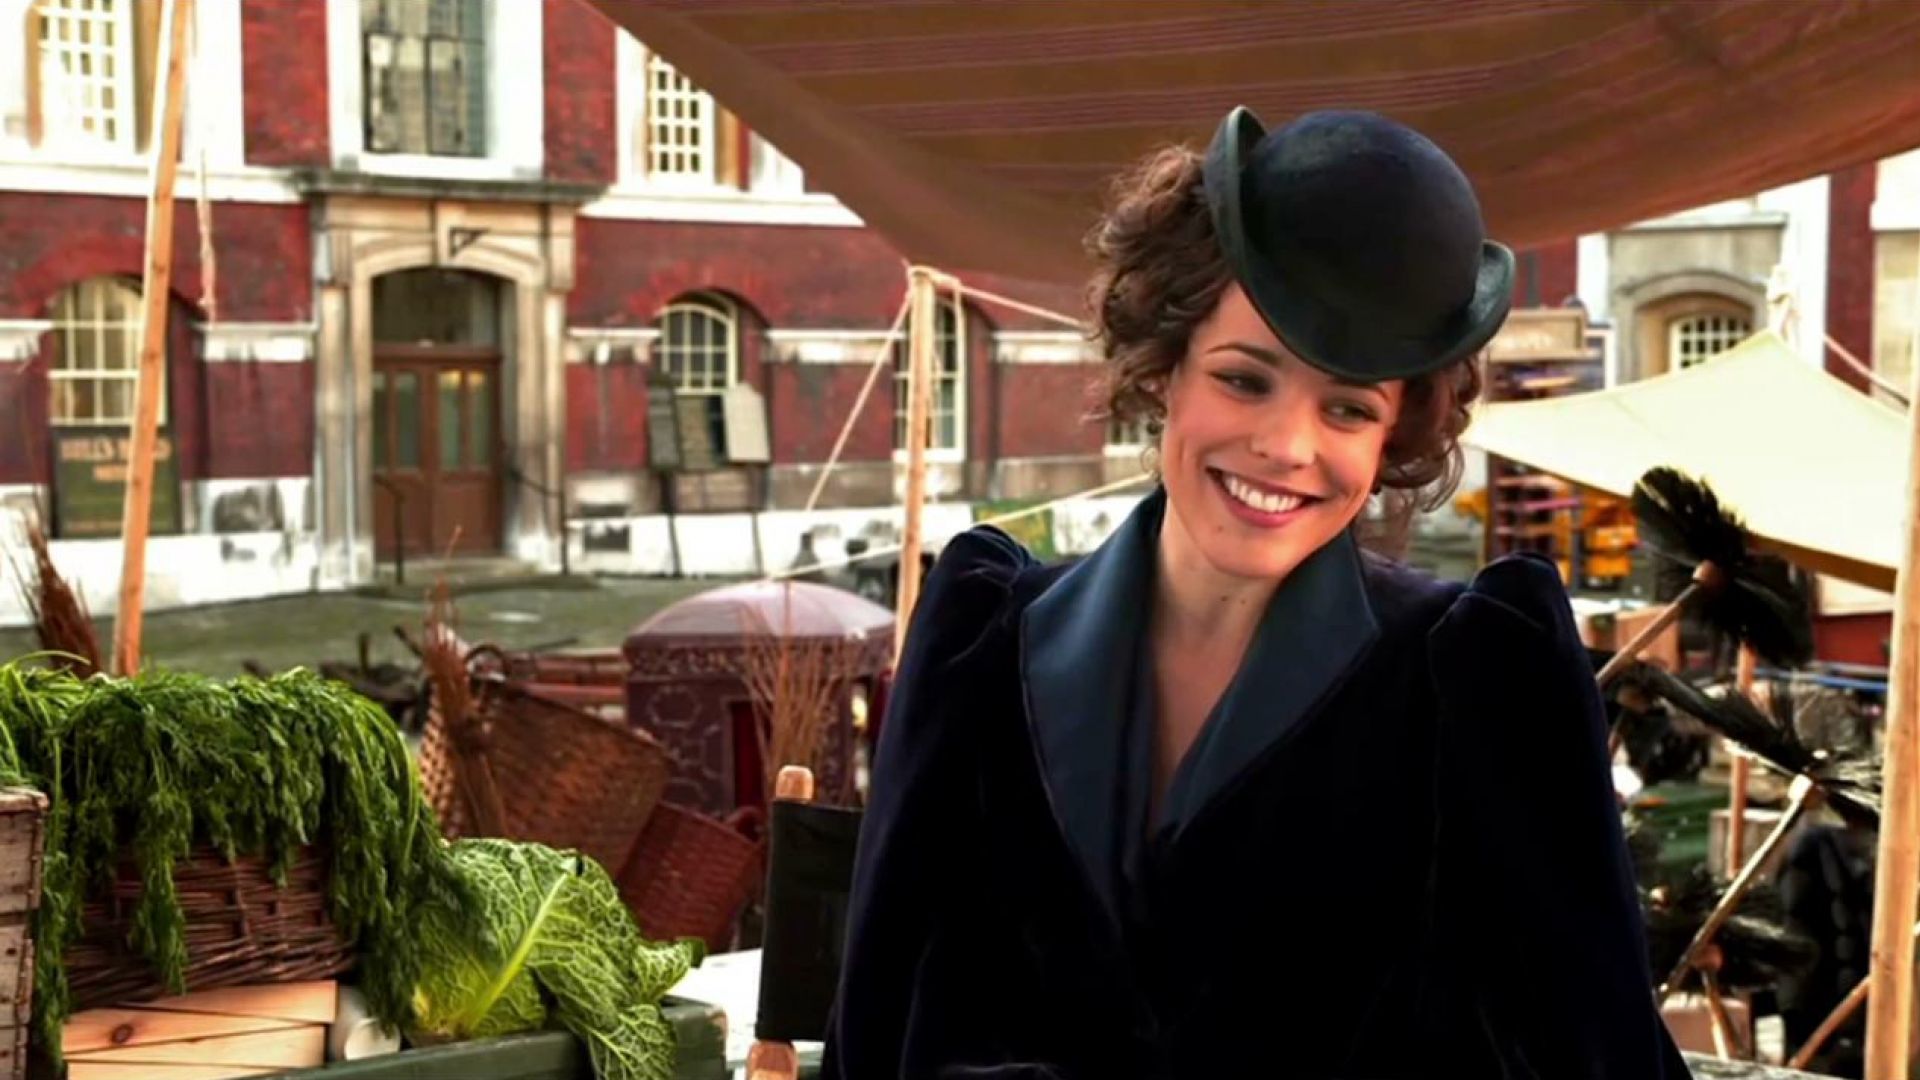 Rachel McAdams on Irene Adler, her relation with Holmes and Moriarty in Sherlock Holmes 2